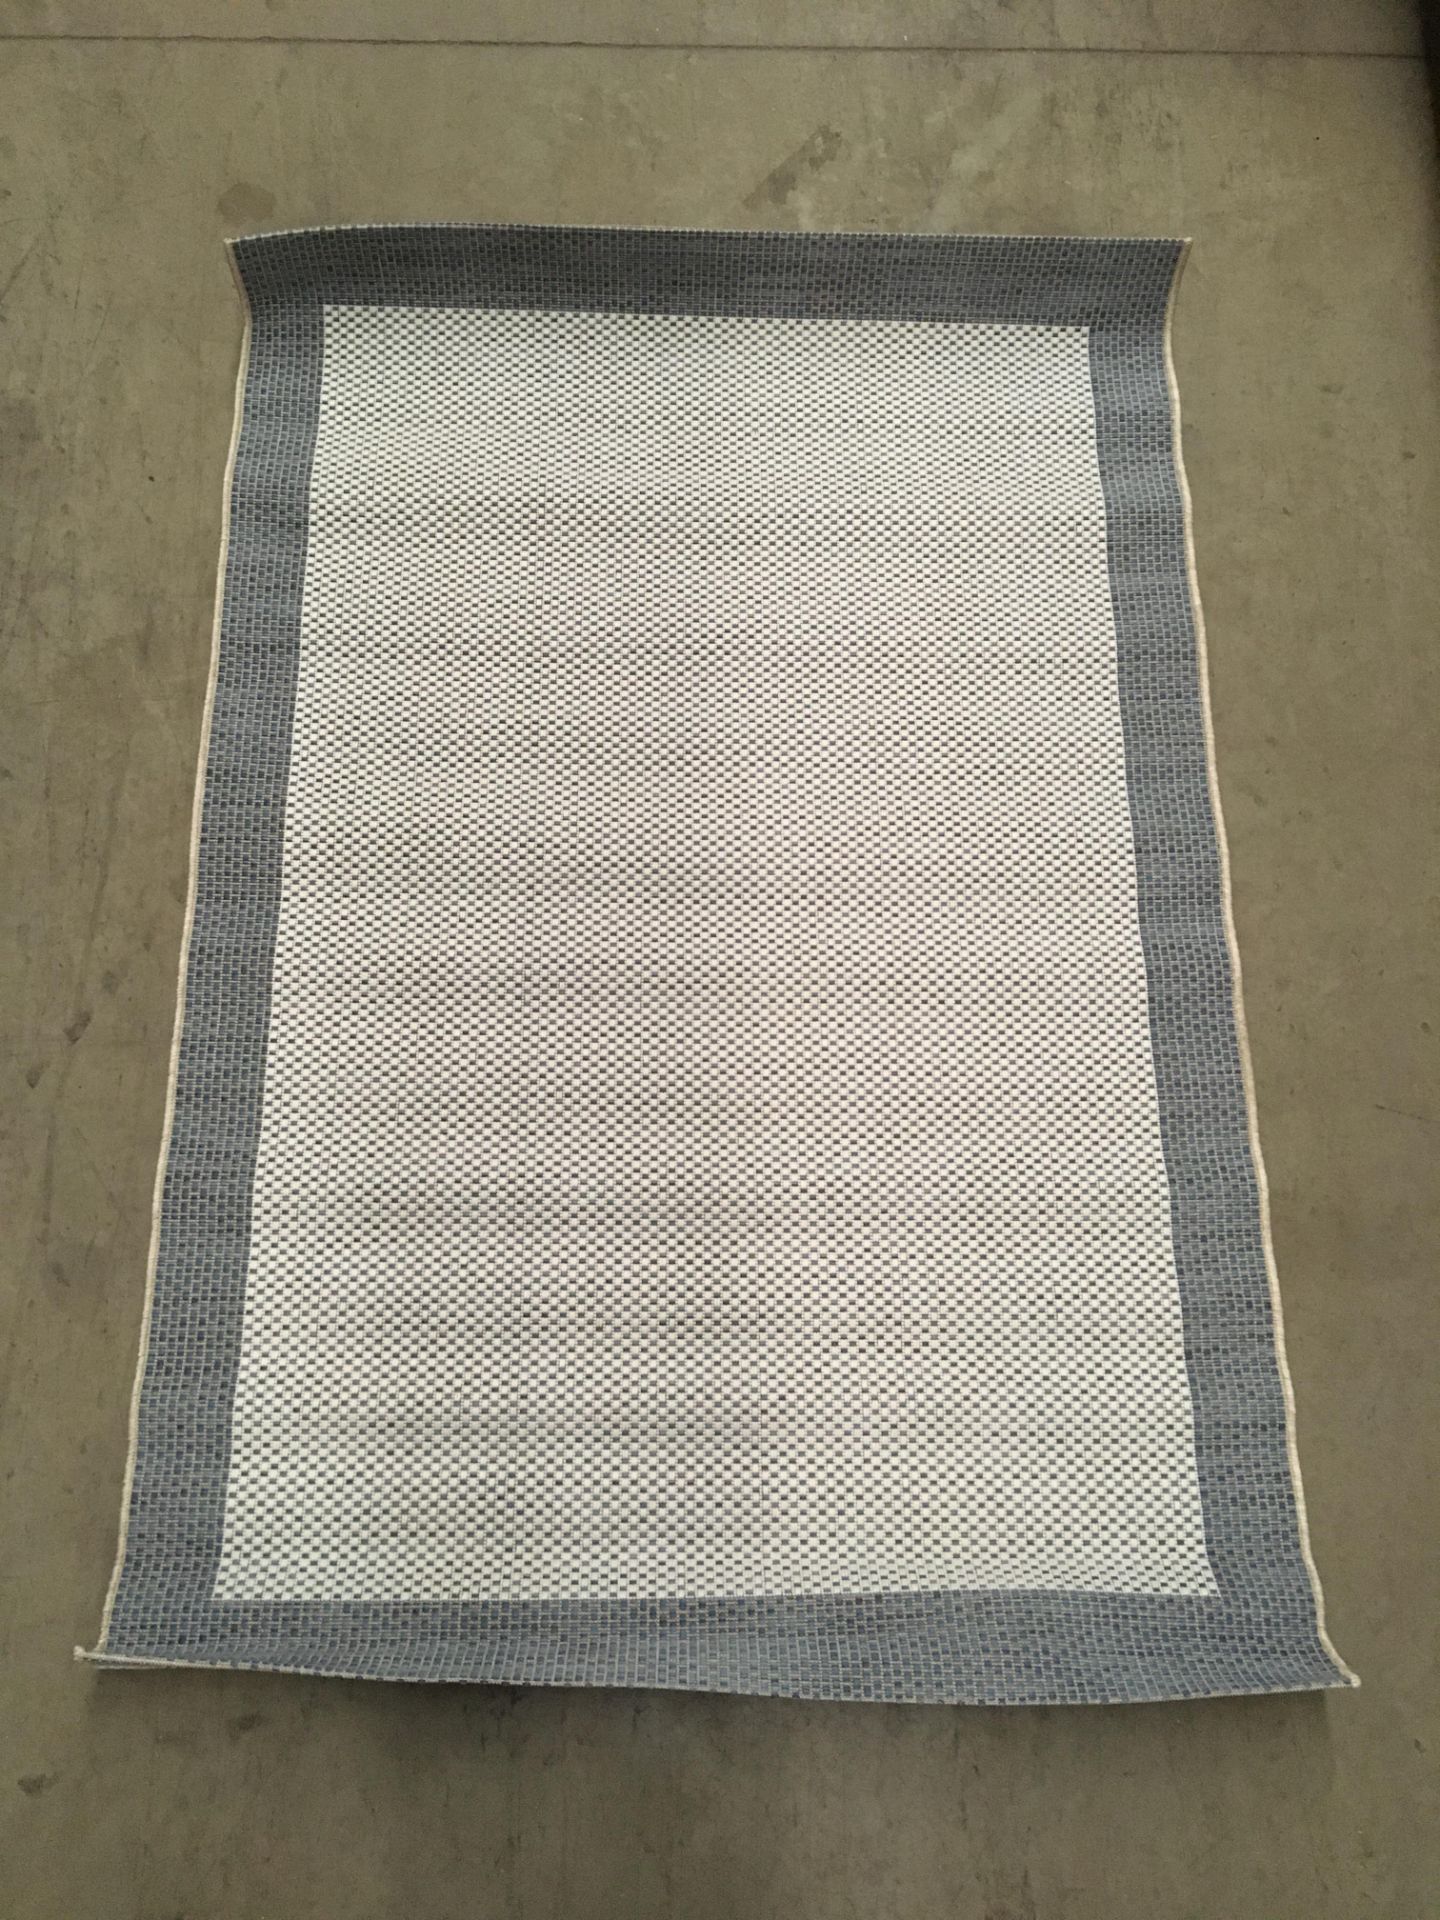 A blue and white patterned rug - 115cm x 170cm